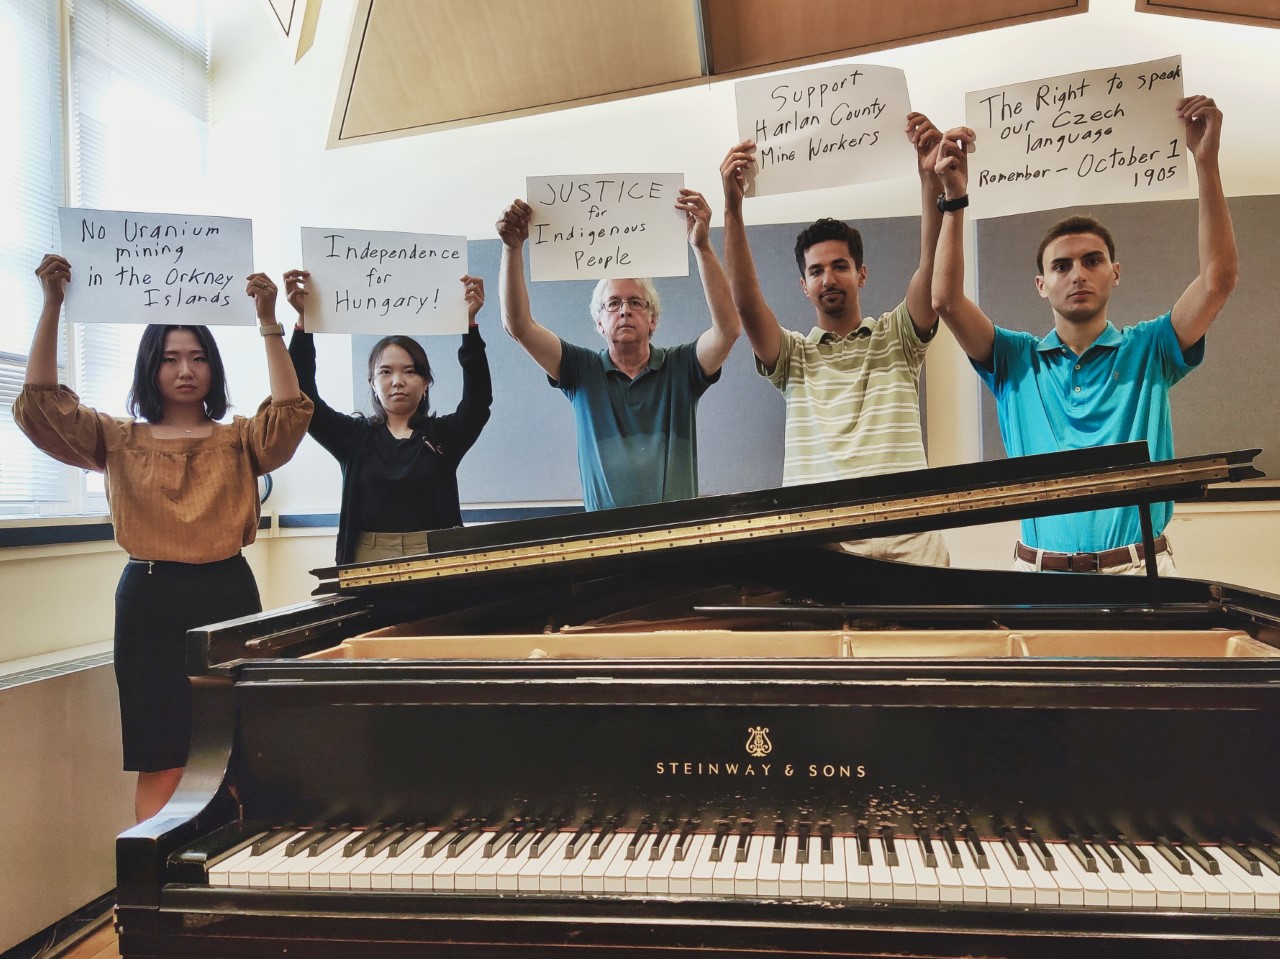 Piano Music of Protest